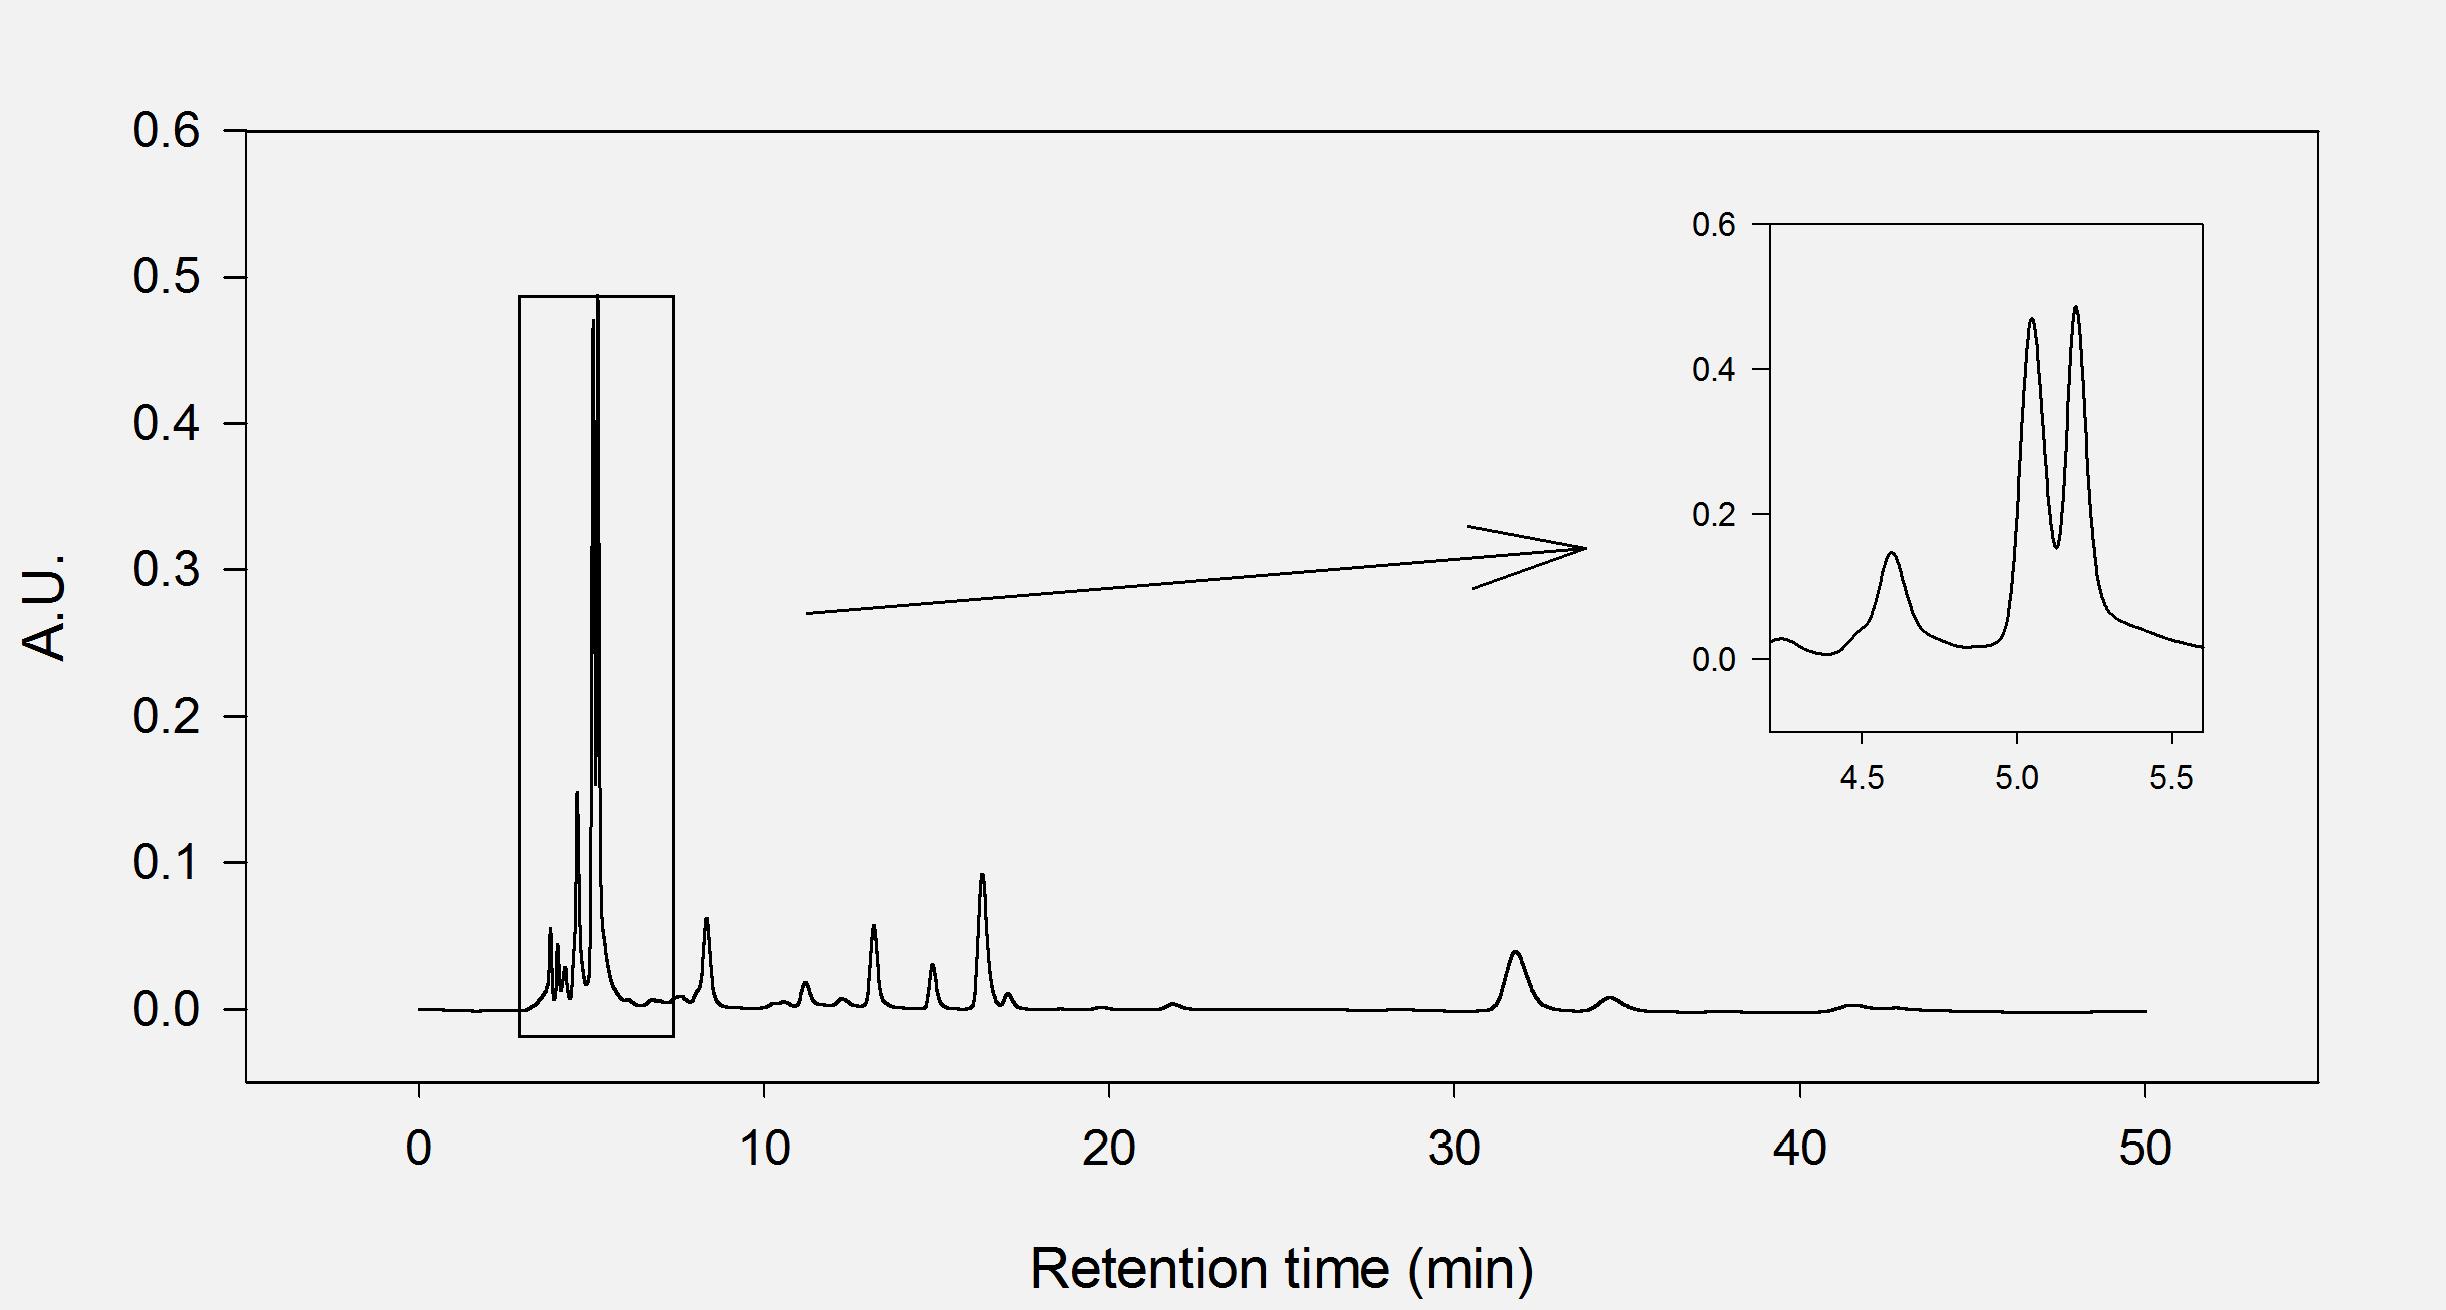 HPLC chromatography profile from methanol and water extracts insea urchin eggs.